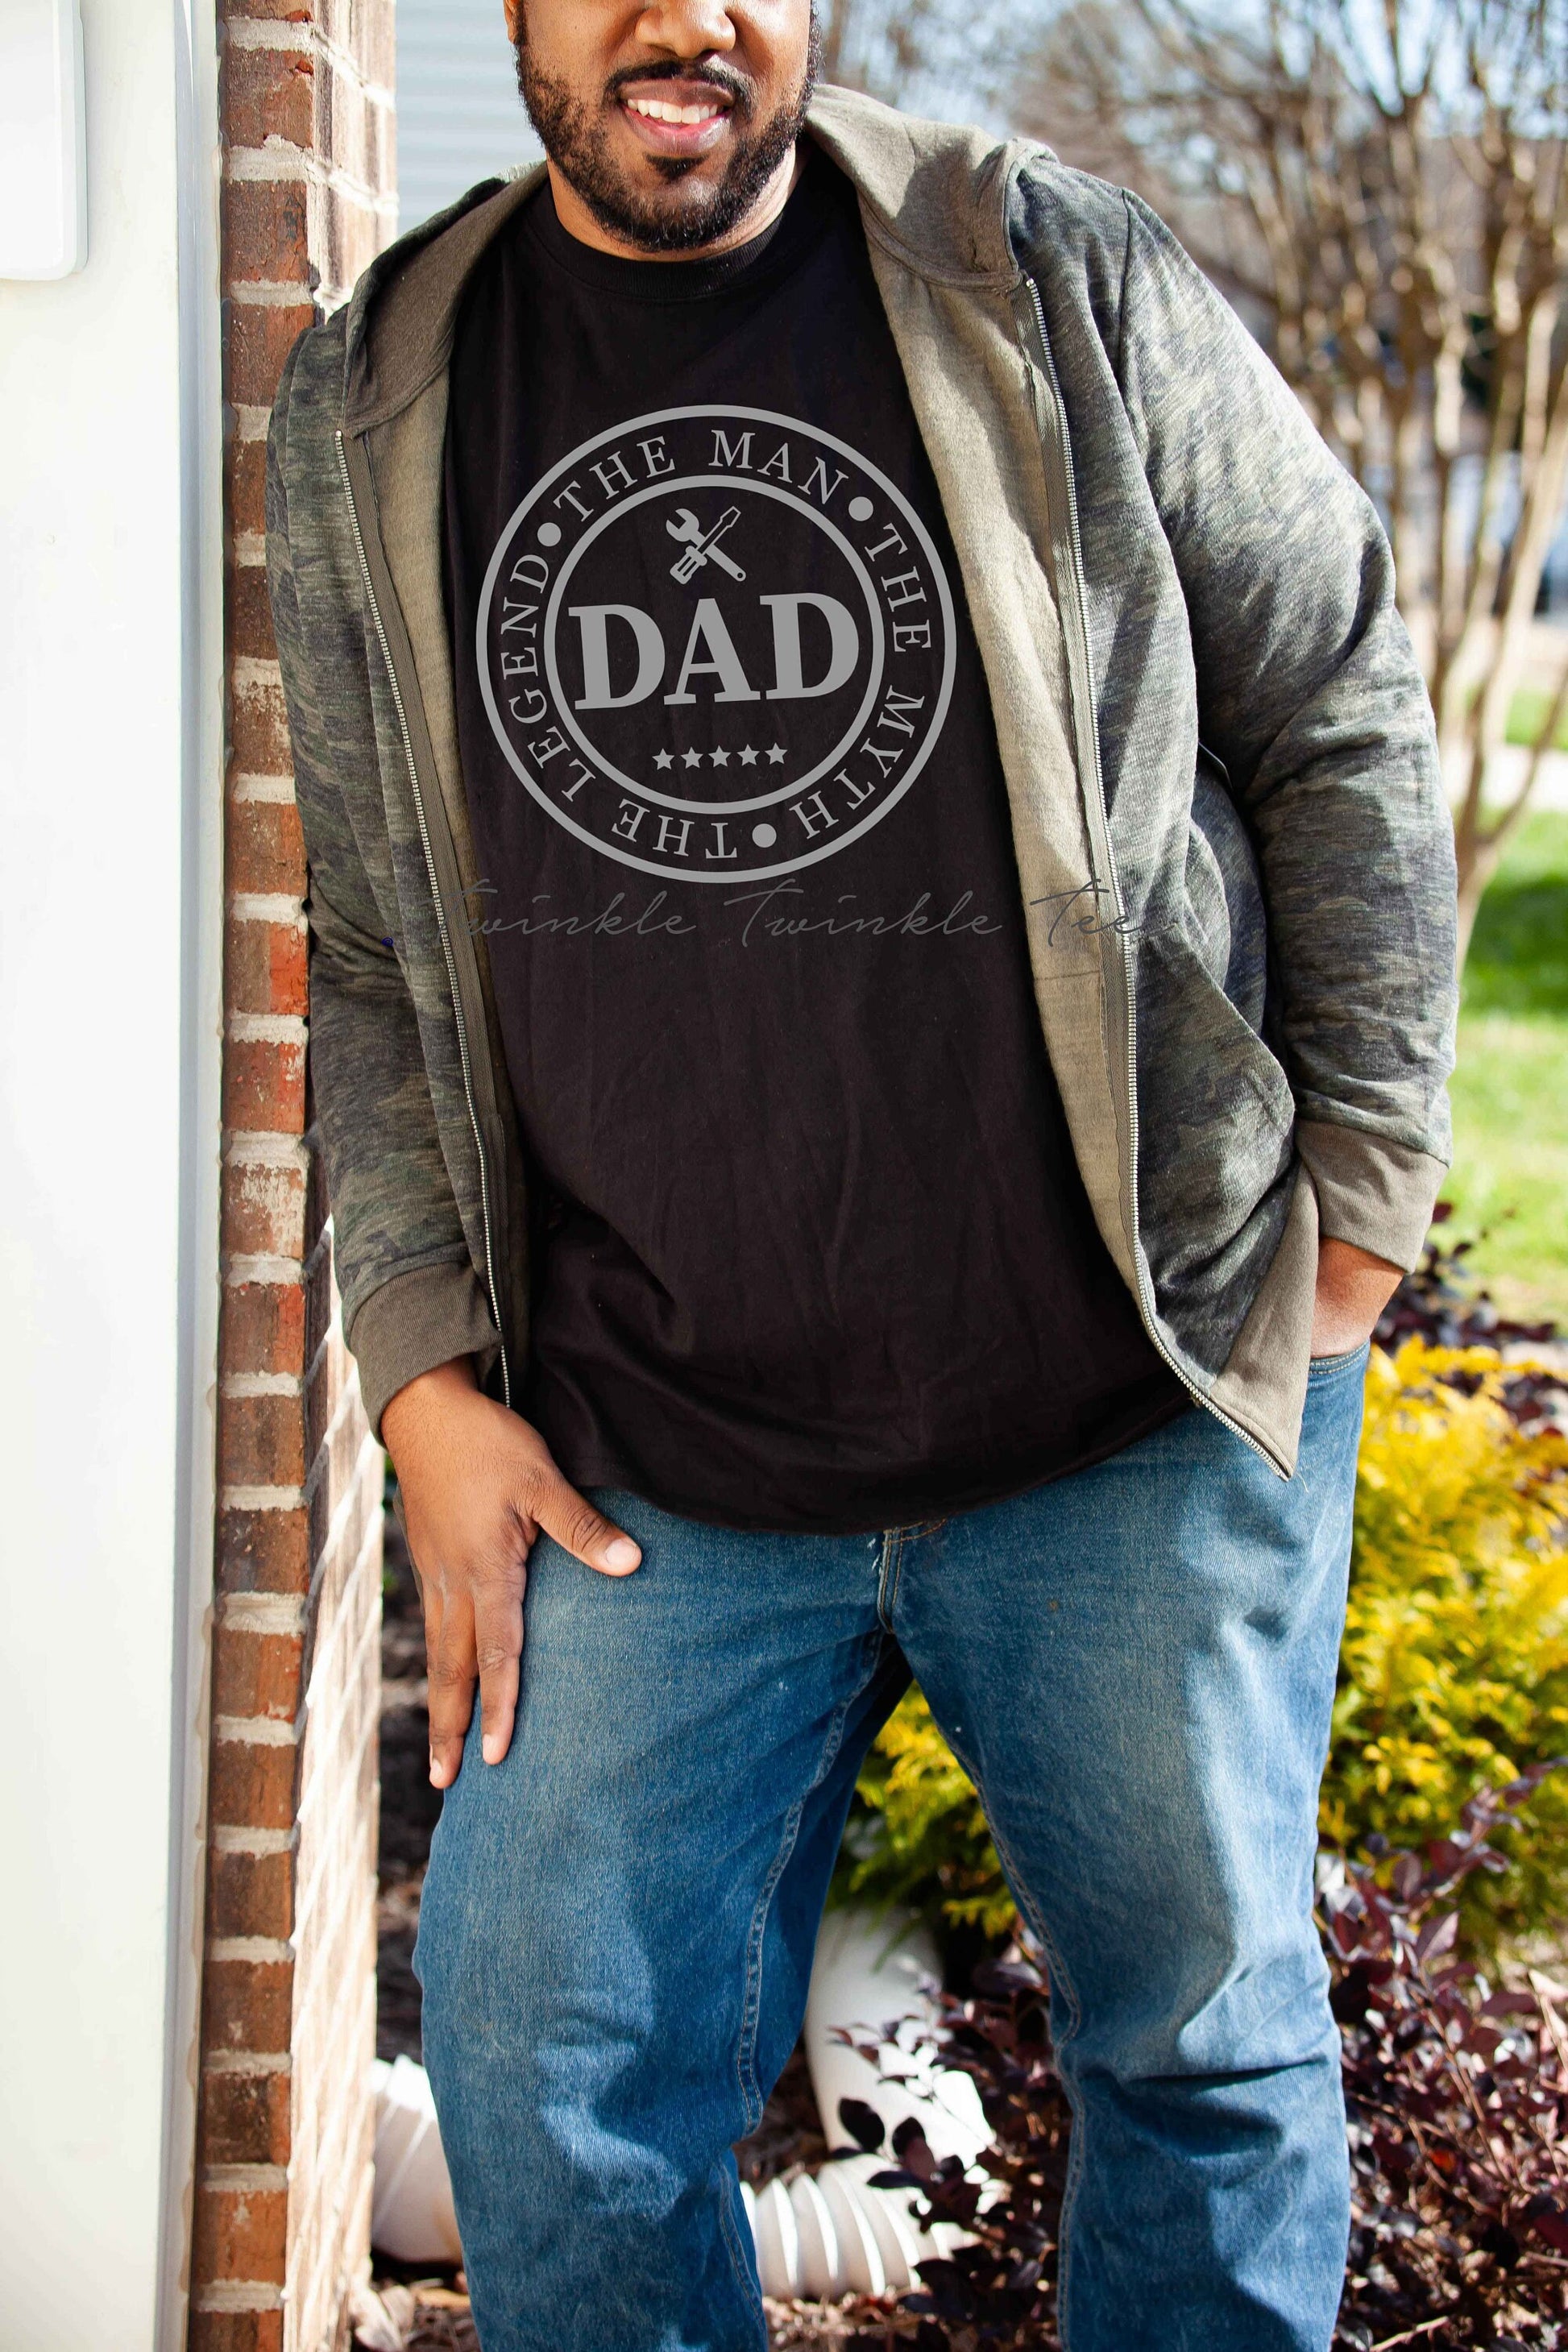 Dad The Man, The Myth, The Legend Shirt - Father's Day Shirt - Dad Shirt - Gifts for Dad - Dad Birthday Gift - Dad T-Shirt